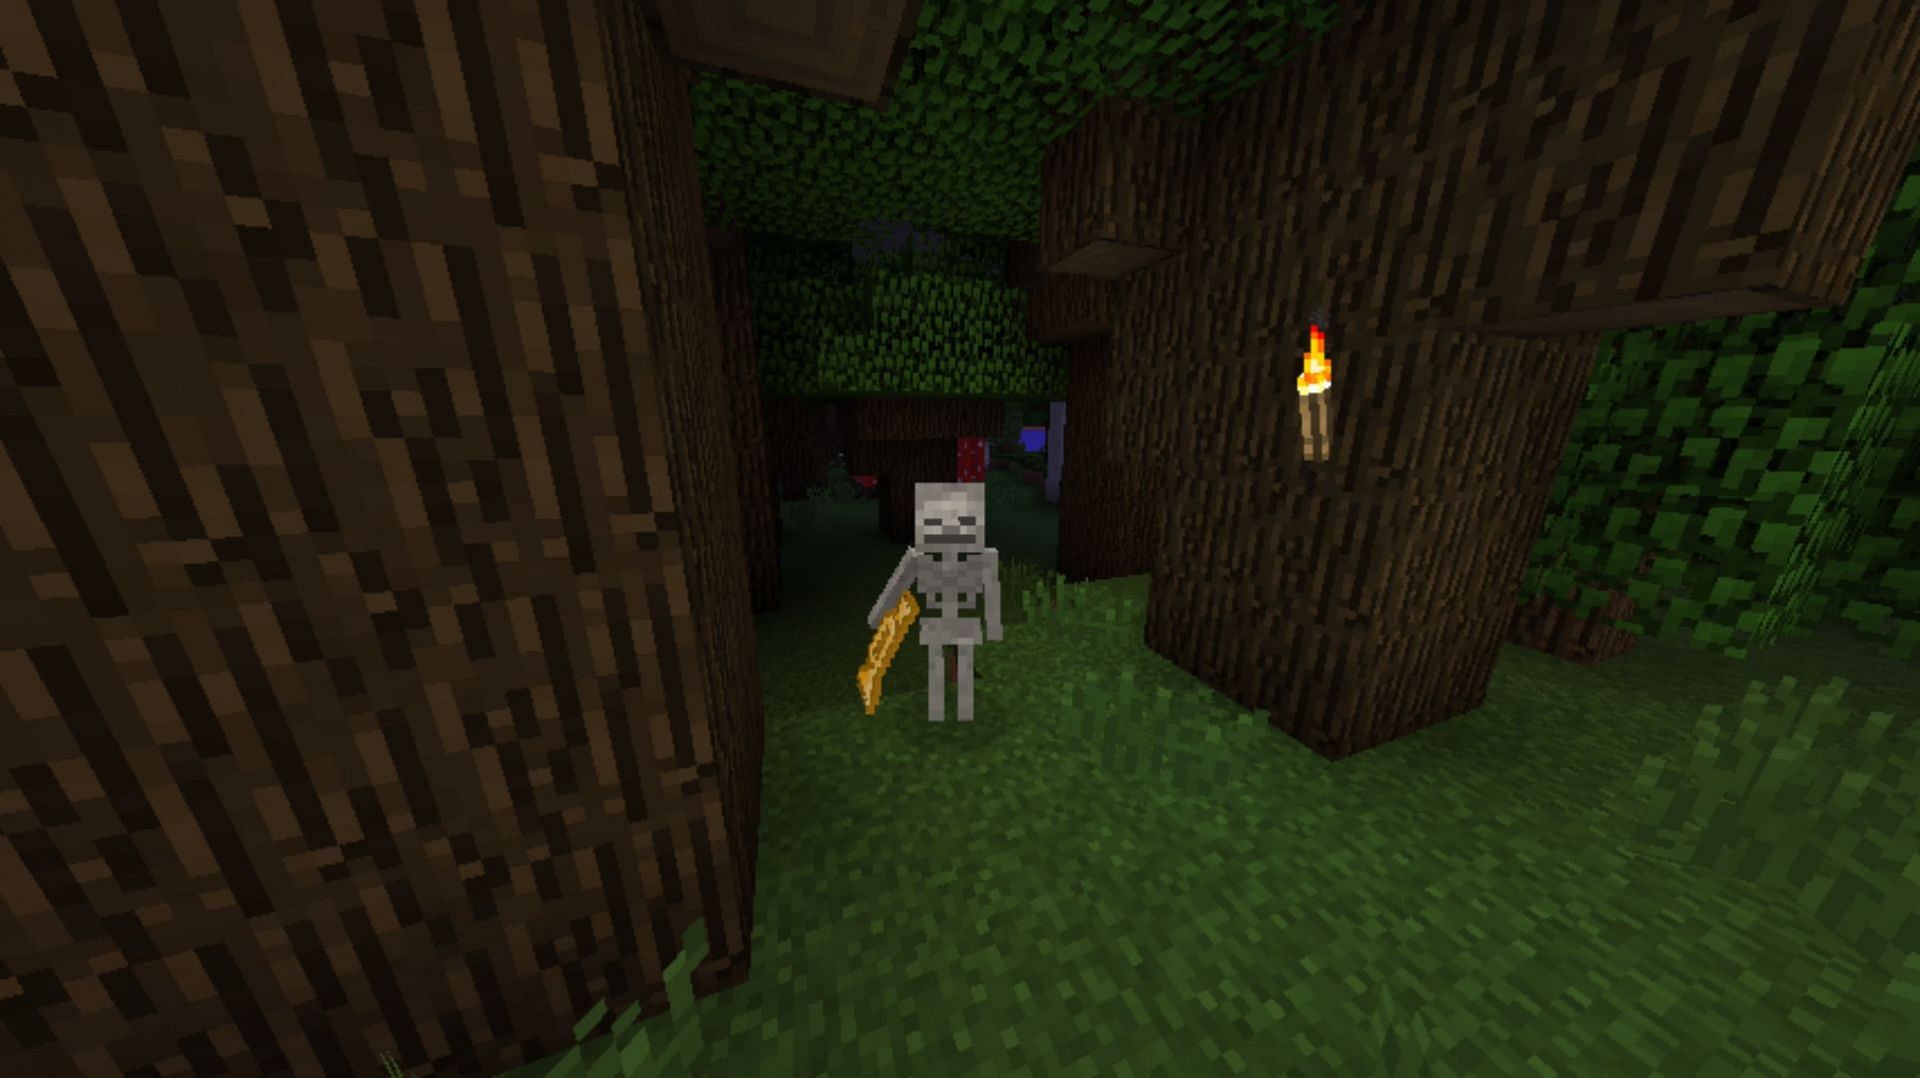 Trumpet Skeleton mod for Minecraft replaces bows with trumpets in skeleton&#039;s hands (Image via CurseForge)